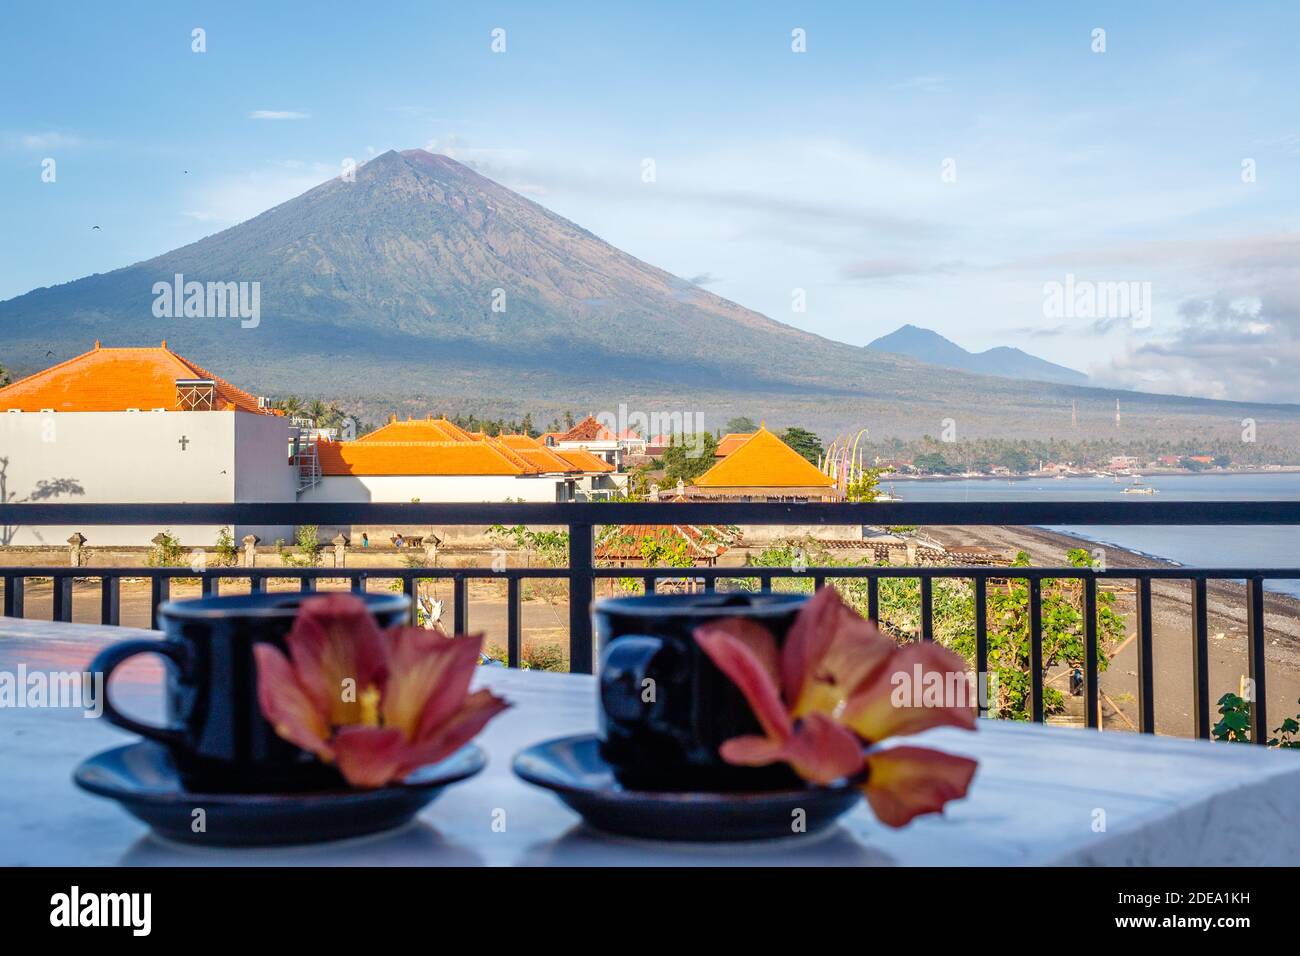 Two cups of coffee with flowers of Hibiscus Tiliaceus or Sea hibiscus, view of volcano Agung on the background. Amed, Karangasem, Bali, Indonesia. Stock Photo